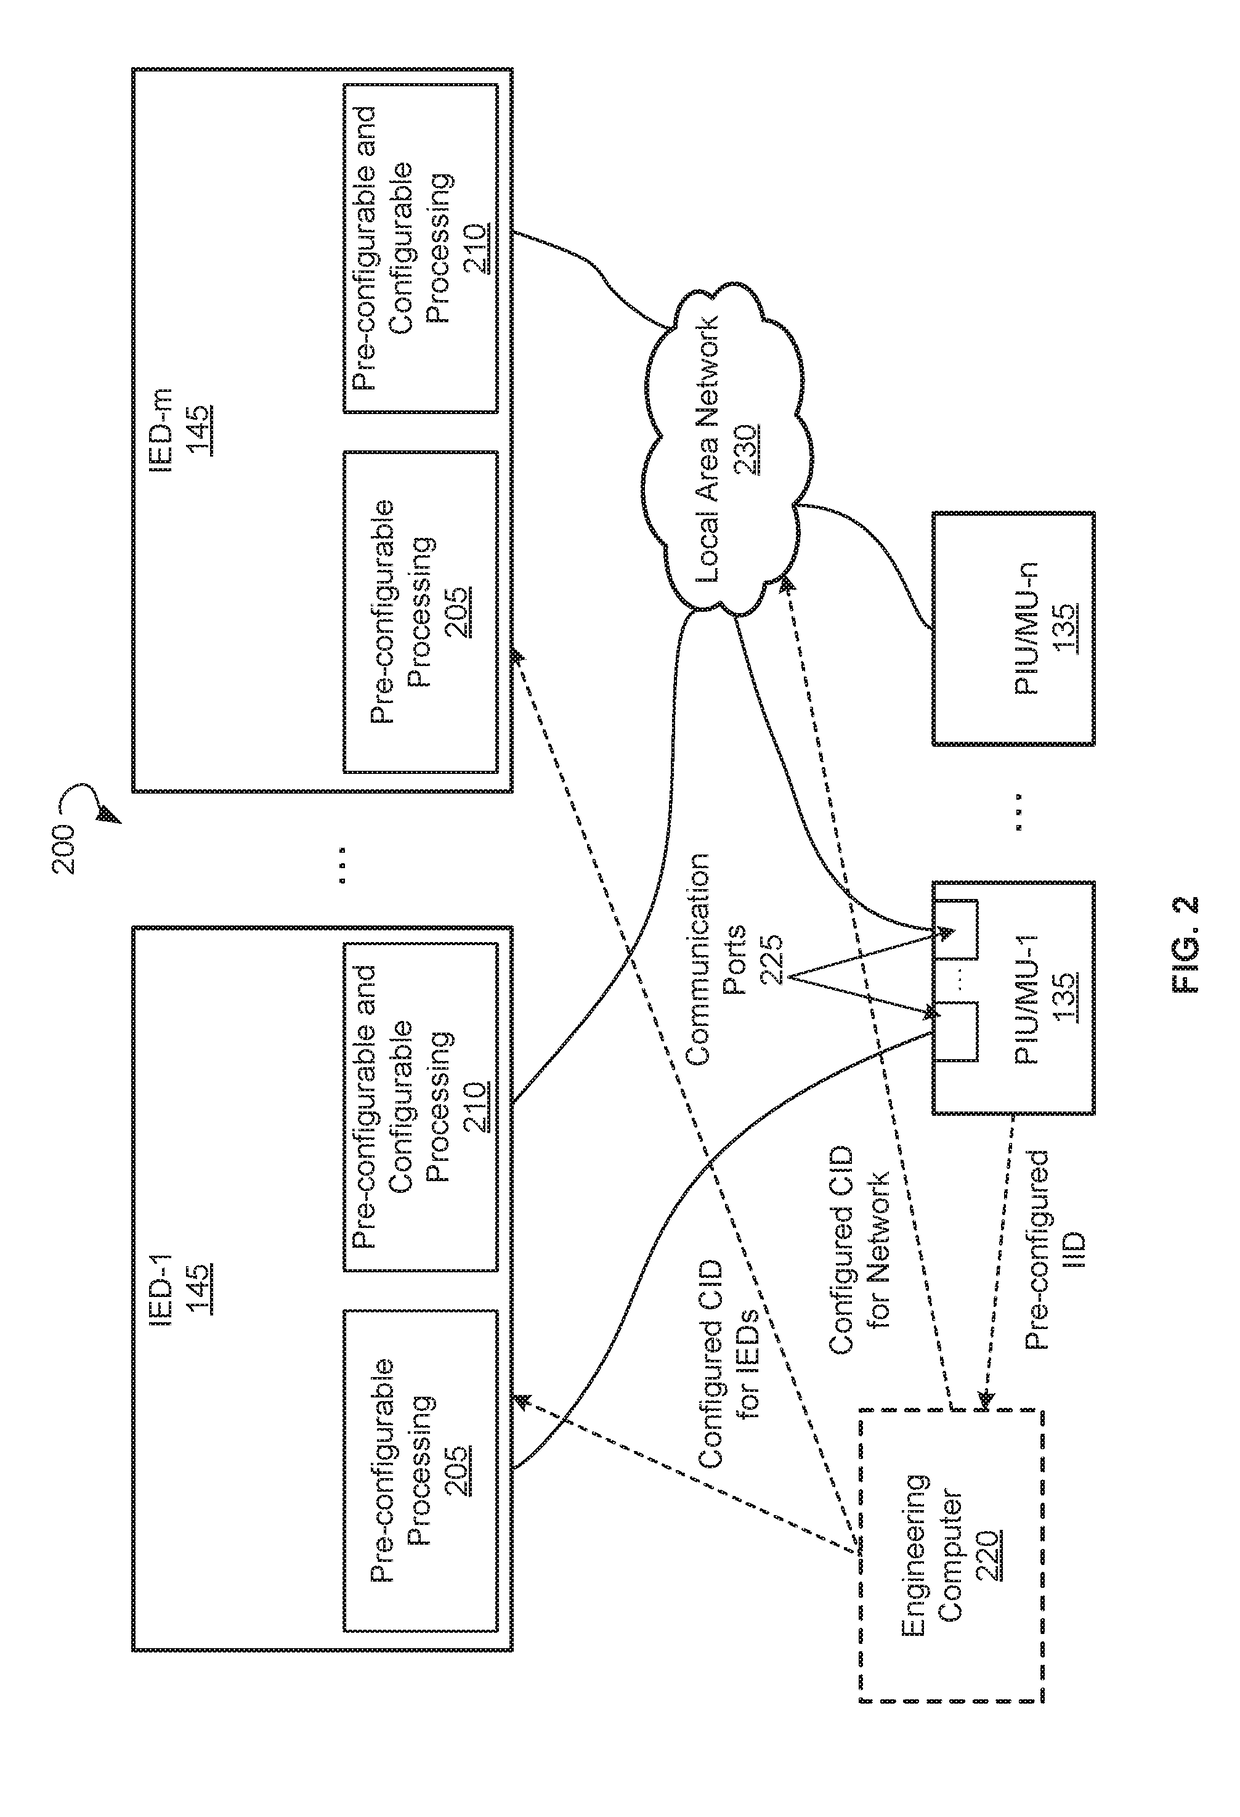 Systems and Methods for Configuration-less Process Bus with Architectural Redundancy in Digital Substations